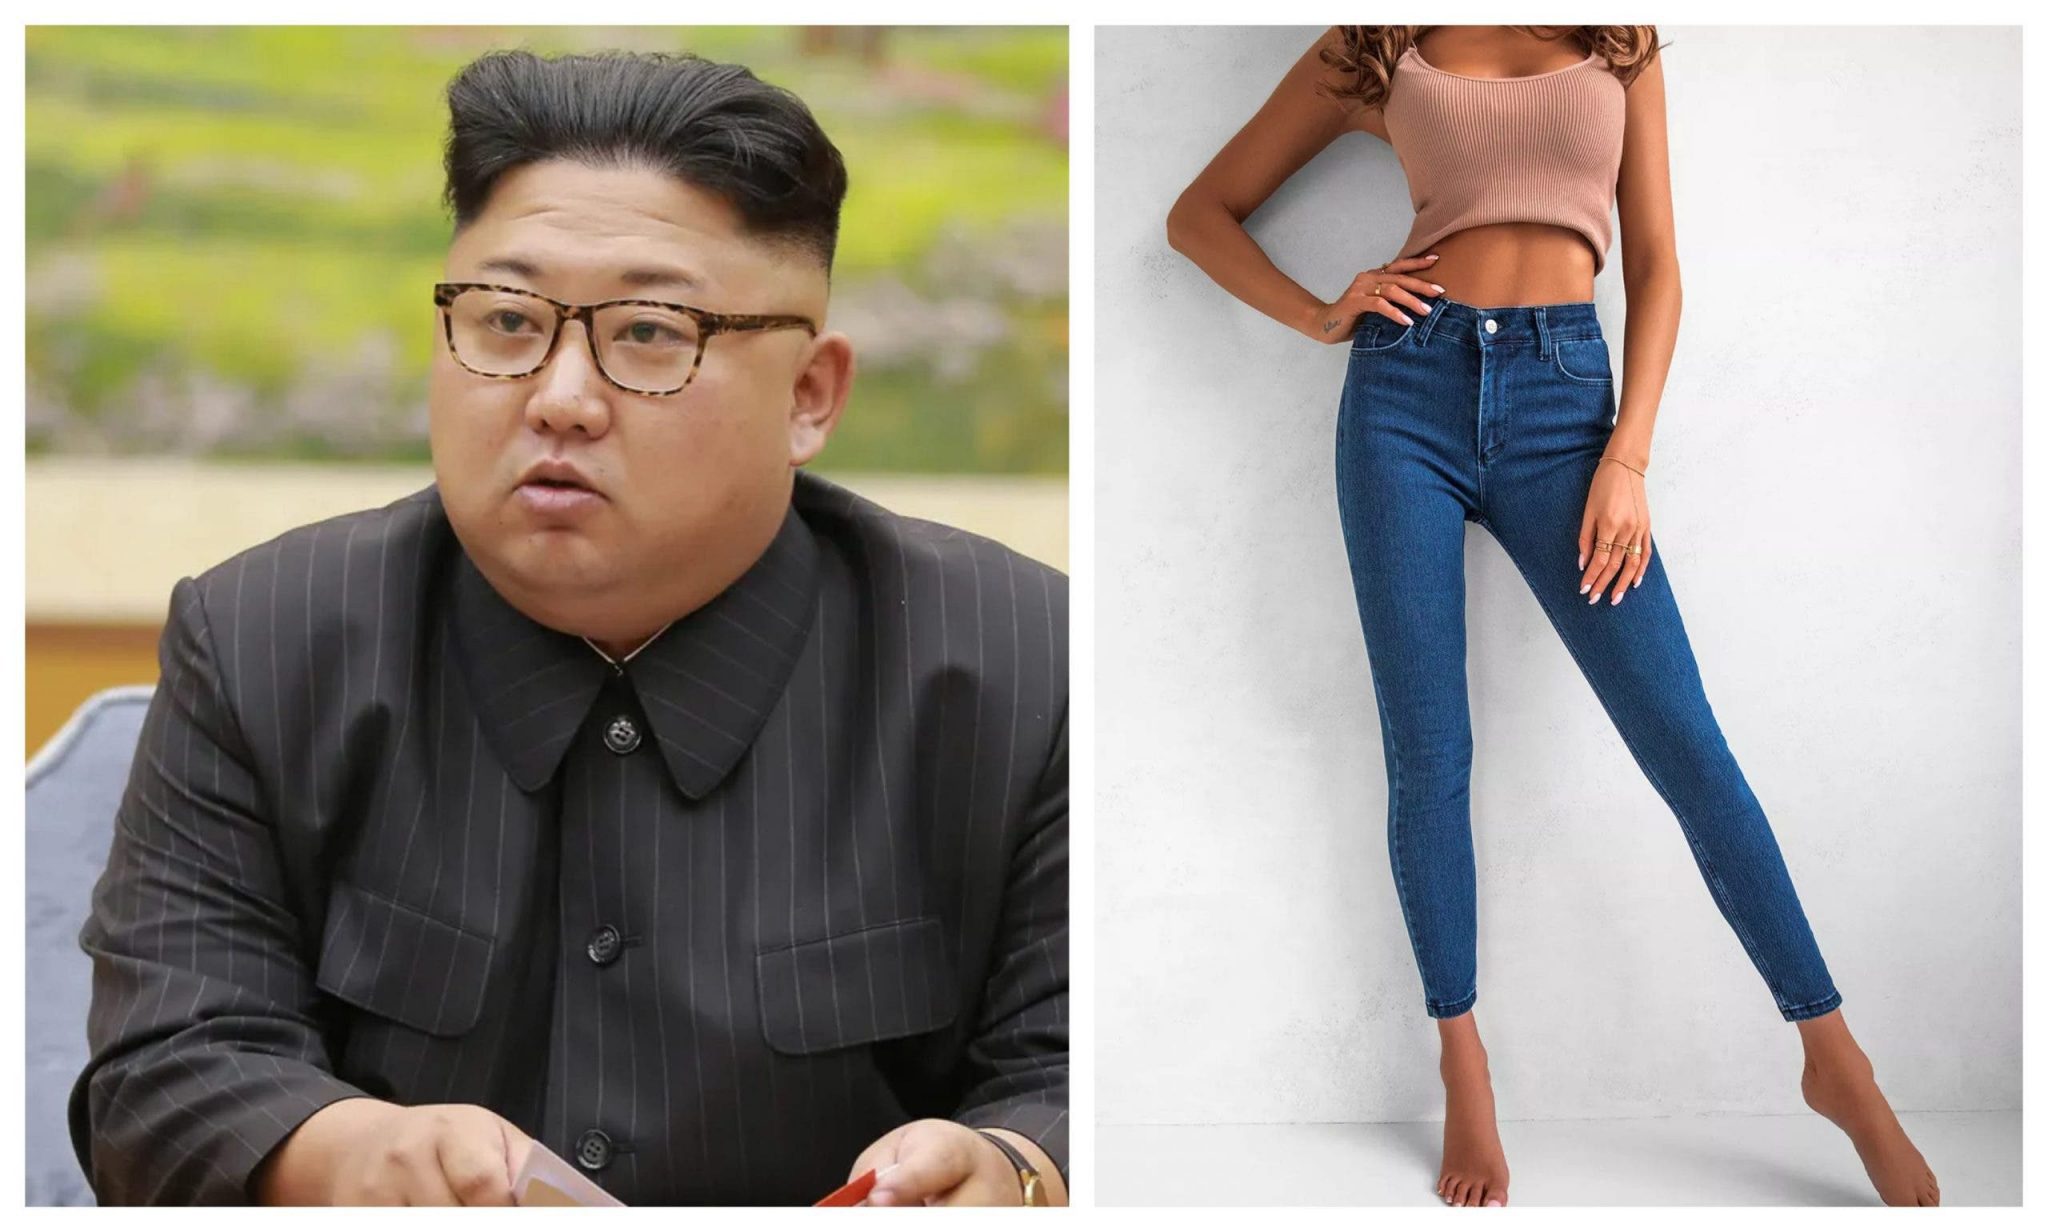 President Kim Jong un bans skinny jeans in North Korea lailasnews 3 scaled 1 scaled